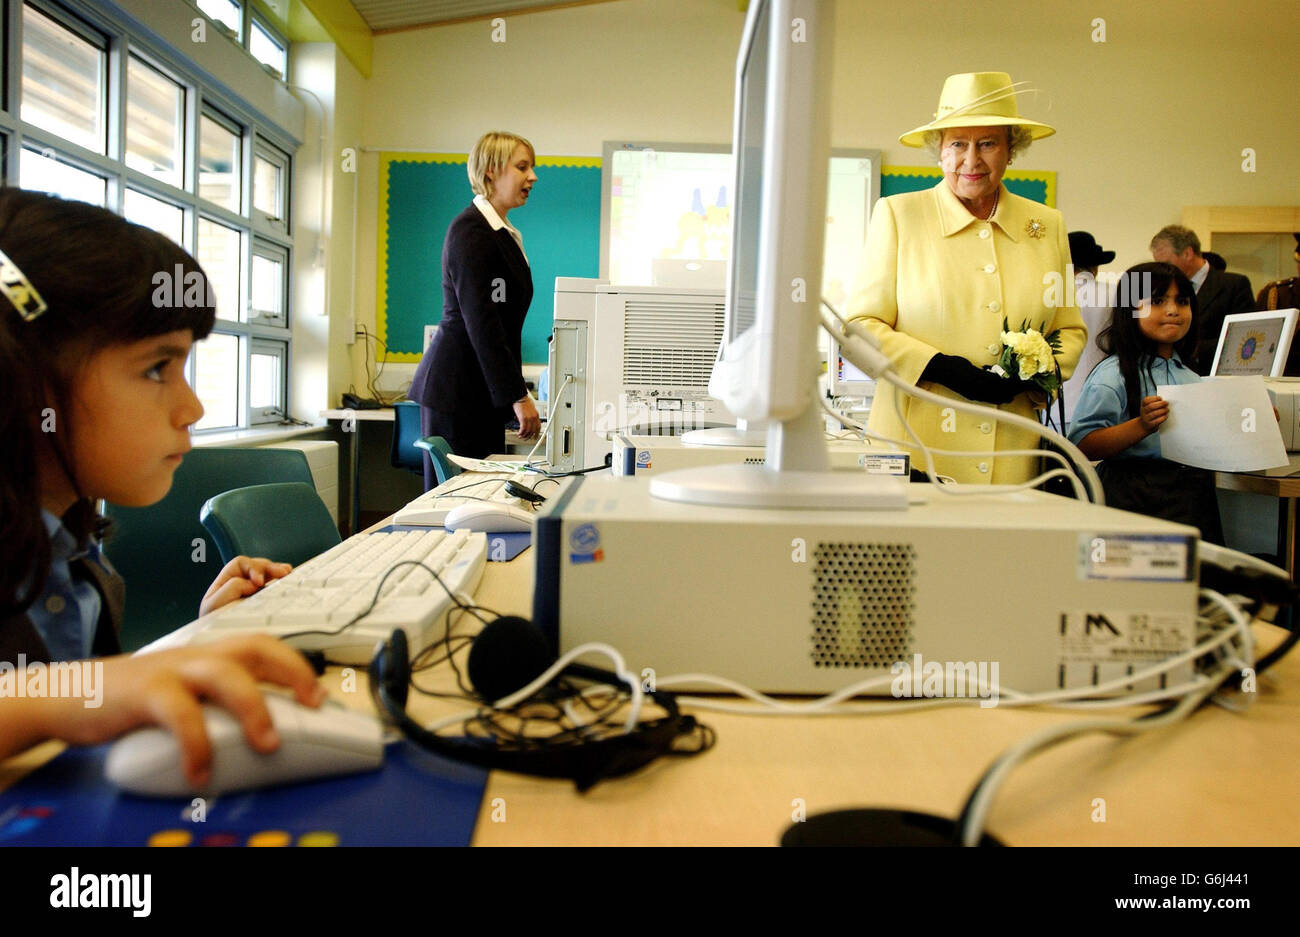 Britain's Queen Elizabeth II watches pupils using computers in the computer room at Keys Meadow Primary school, a new primary school in Enfield Lock. * During the visit to the London Borough of Enfield, the Queen and the Duke of Edinburgh unveiled a plaque at the Town Market commemorating the area s lengthy trading links. Enfield was granted its first market charter 700 years ago in 1303, and in 1632 the parish authorities created a central Market Place. The royal couple took part in a walkabout and met local residents before opening a new credit union in the shopping arcade. Stock Photo